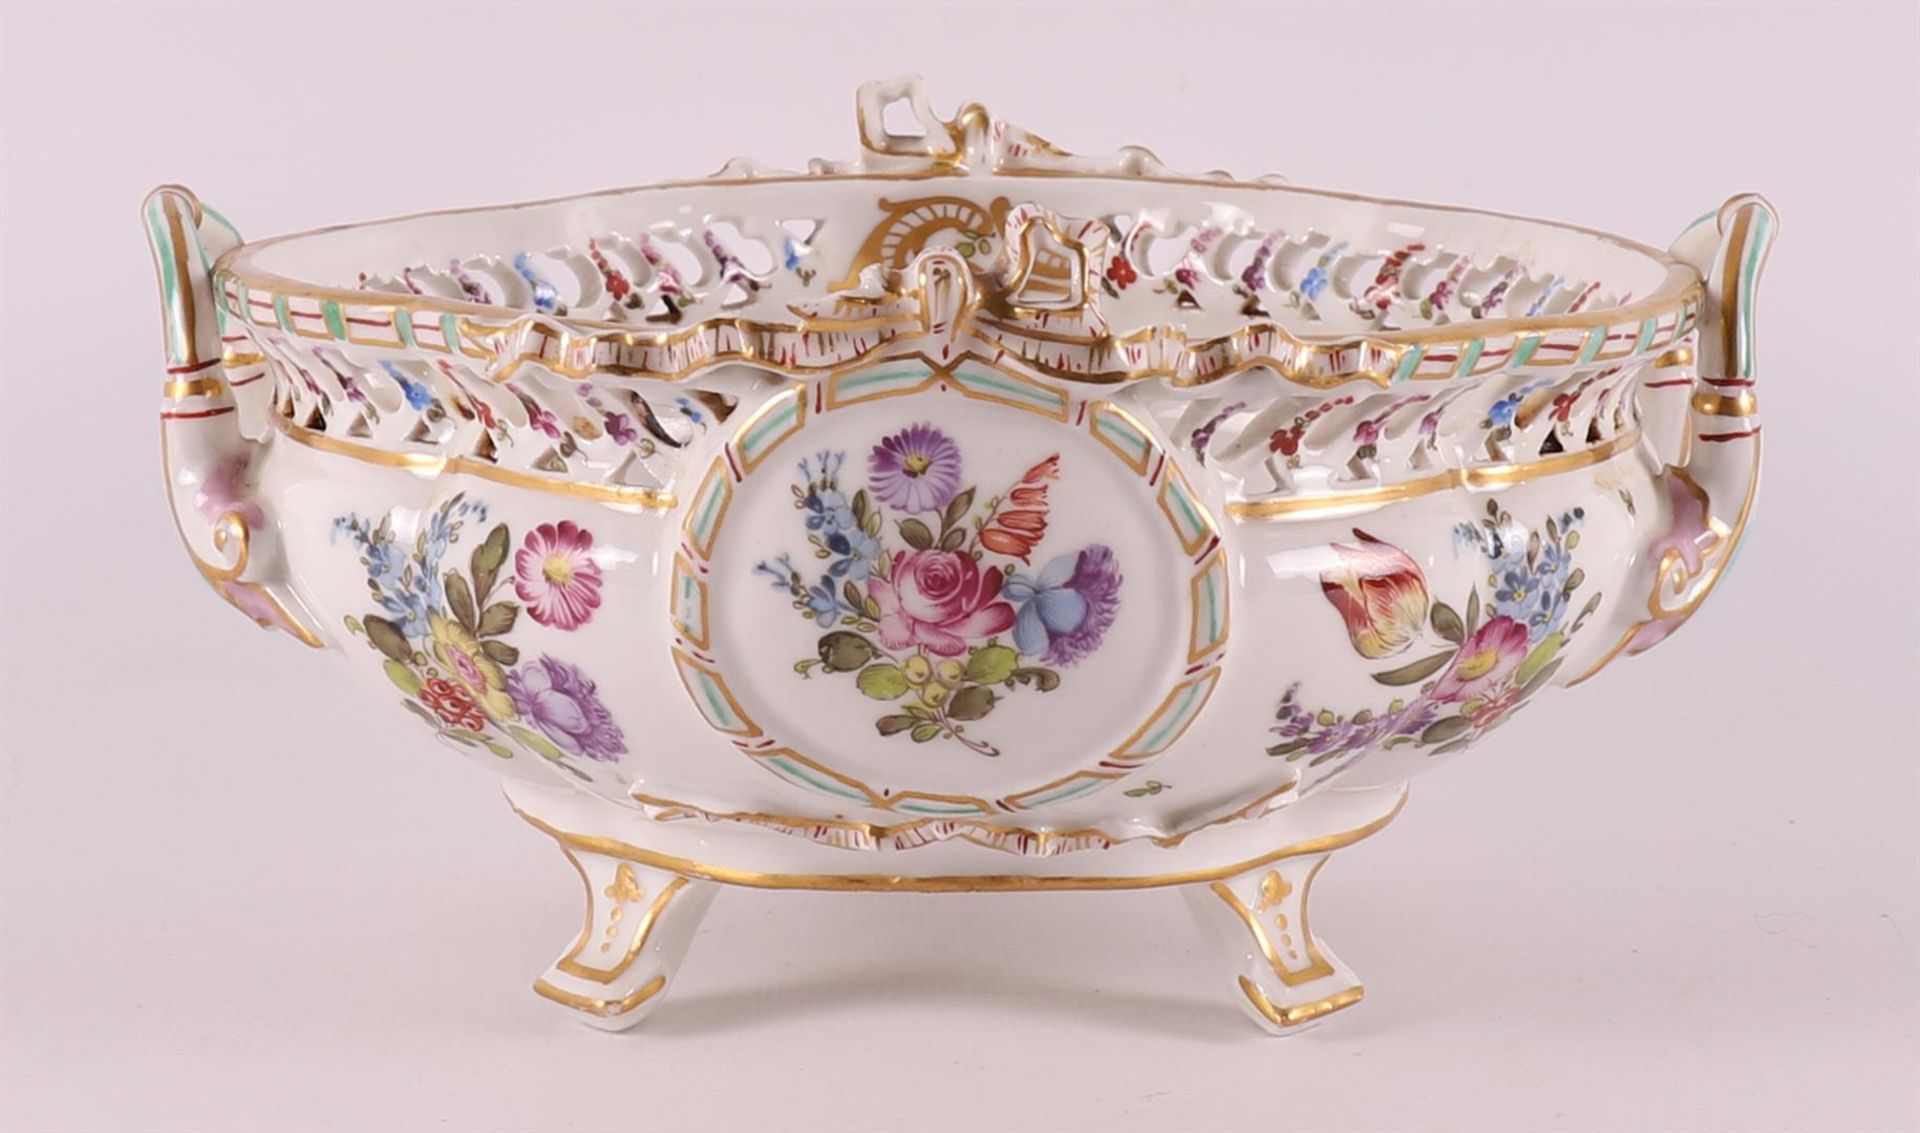 A porcelain fruit bowl, after a Meißen example, Germany, 20th century.